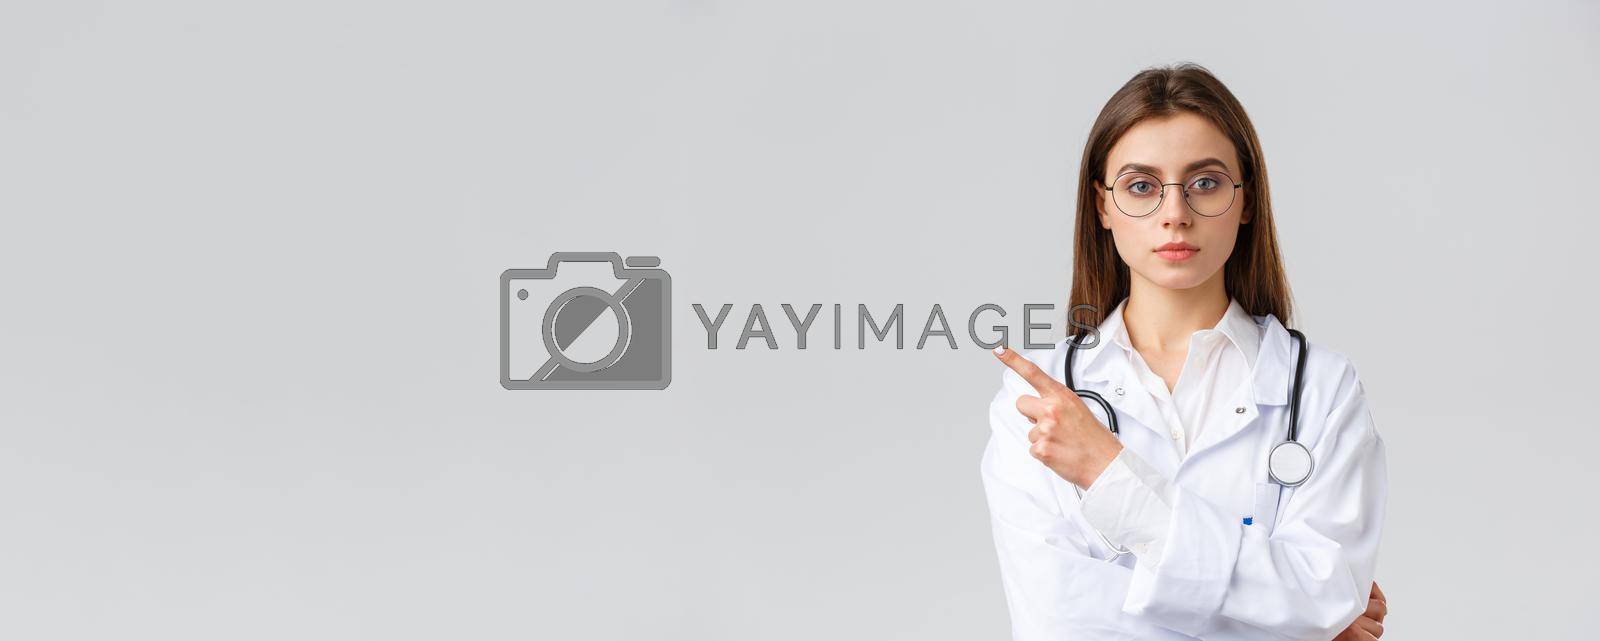 Healthcare workers, medicine, insurance and covid-19 pandemic concept. Serious-looking professional female doctor, nurse in white scrubs and glasses pointing finger left at banner or clinic info.